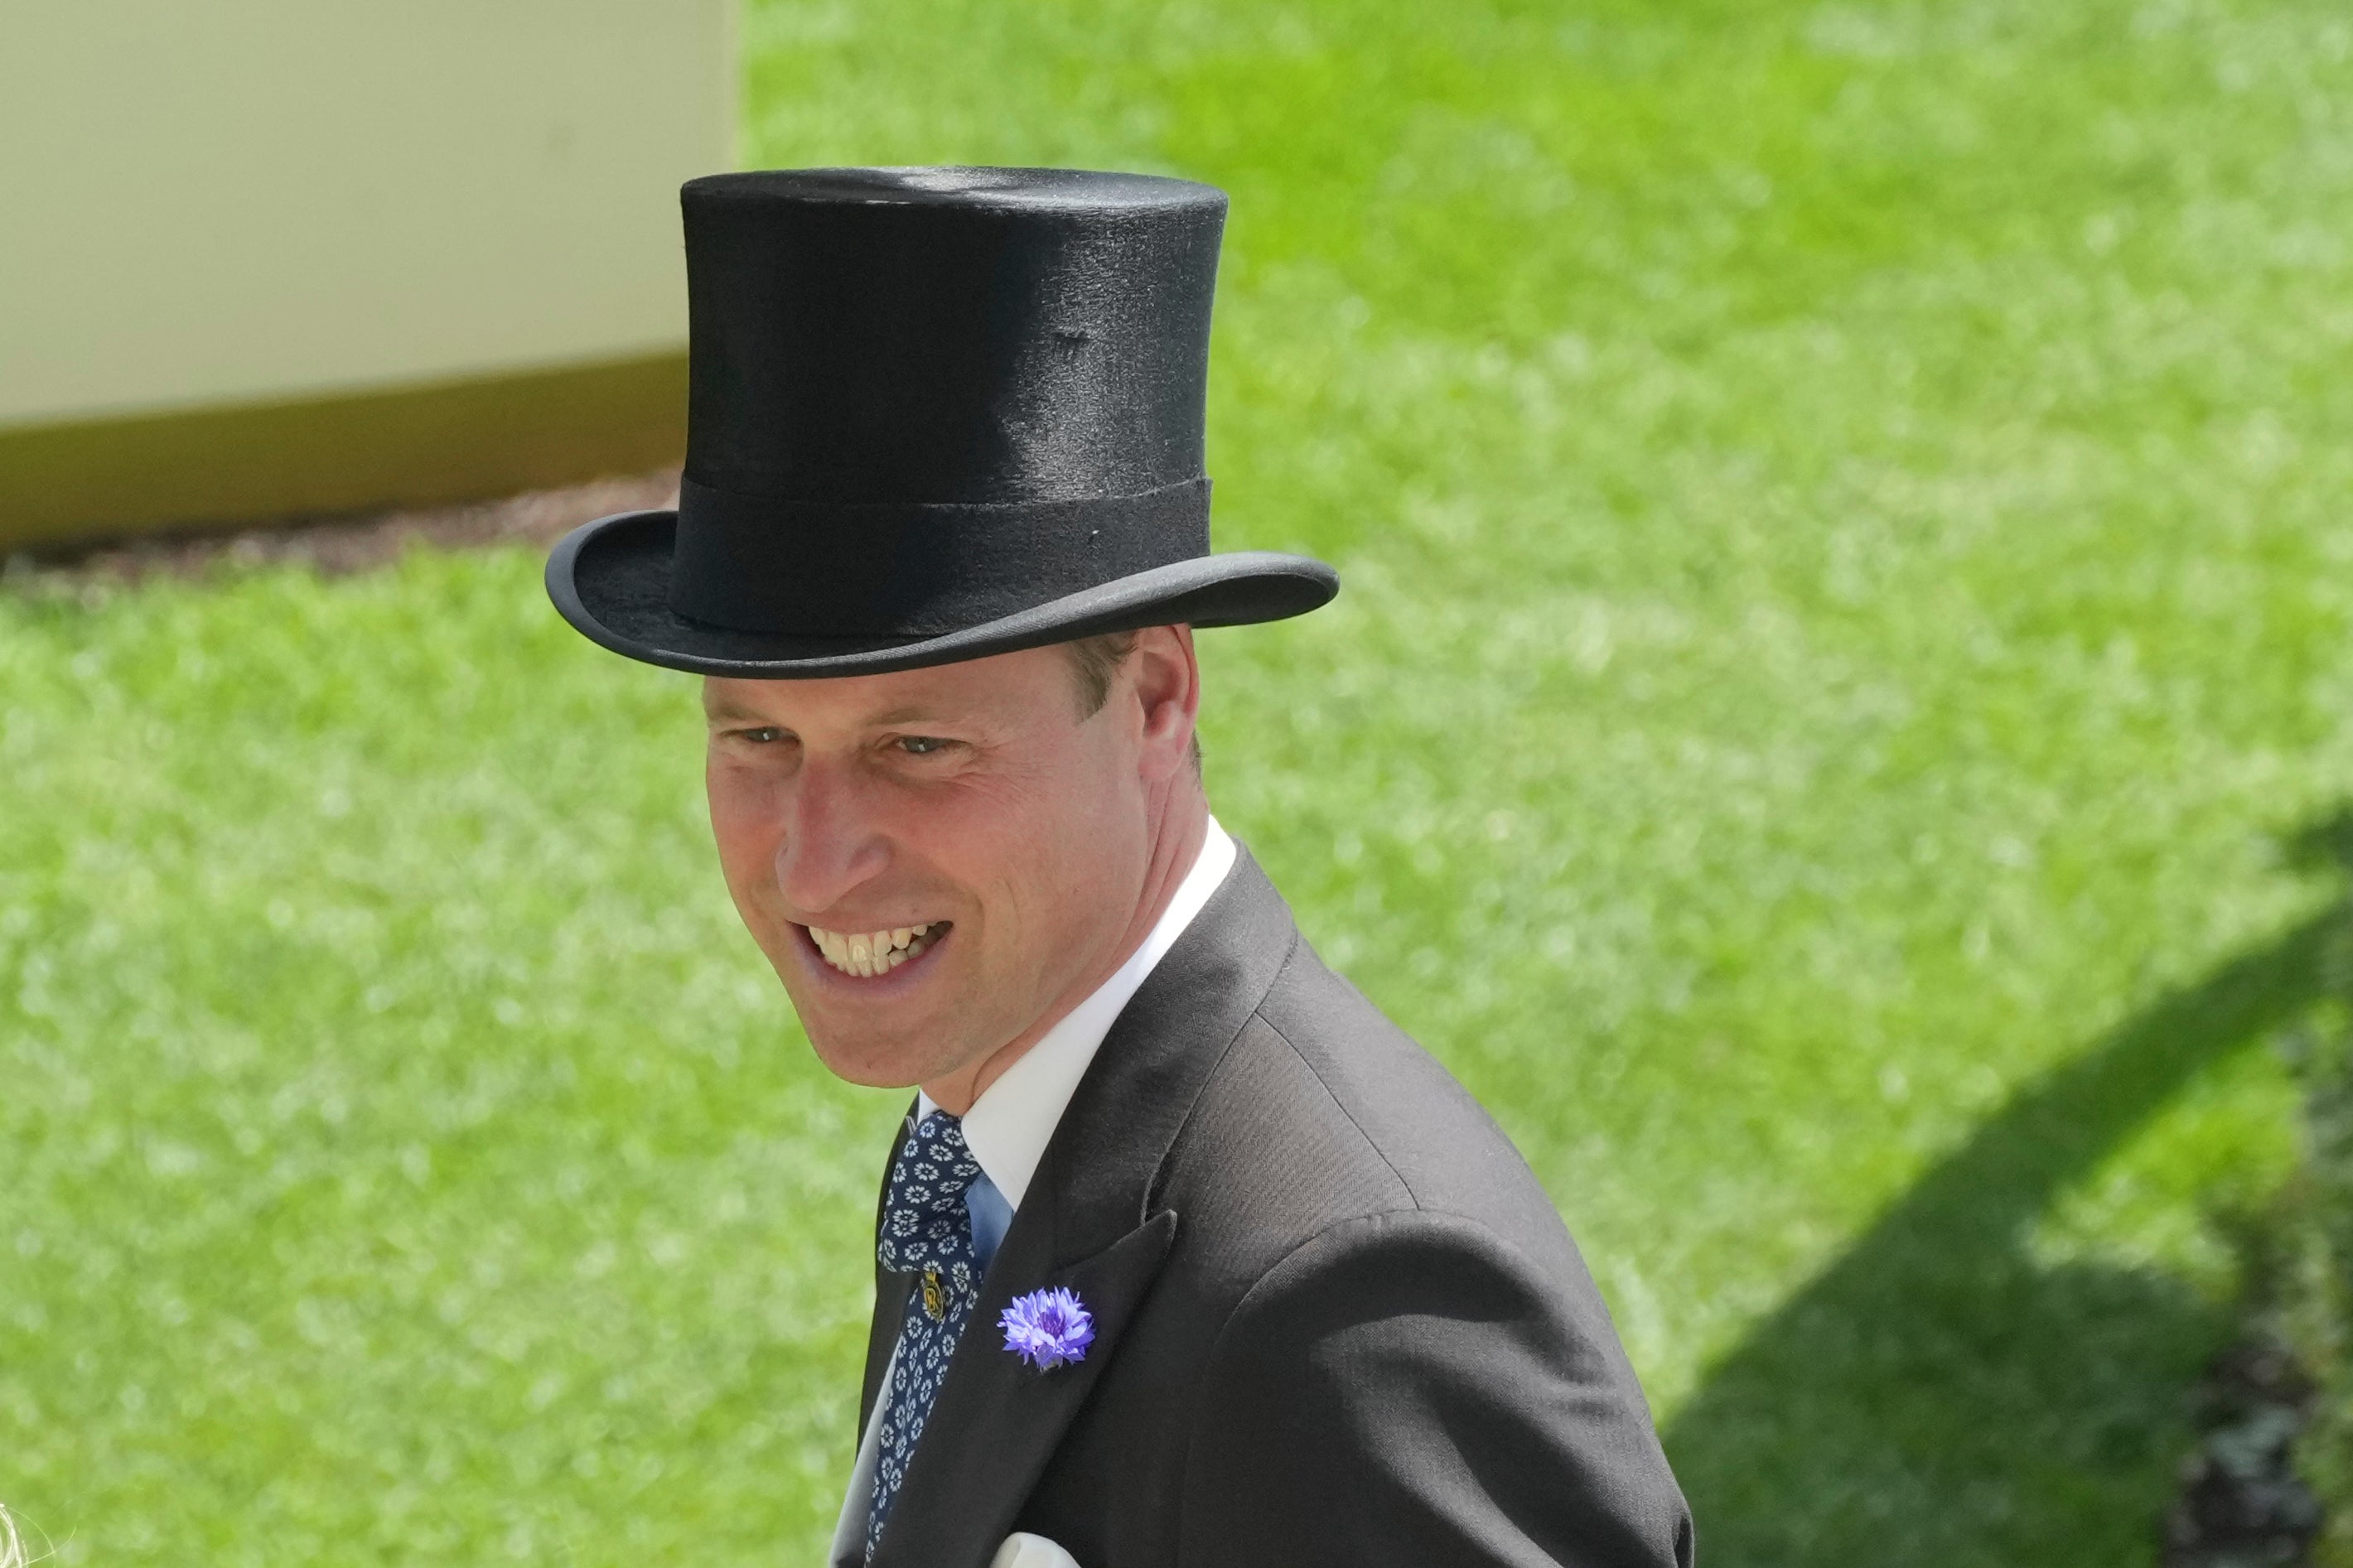 Prince William attended Royal Ascot without the Princess of Wales